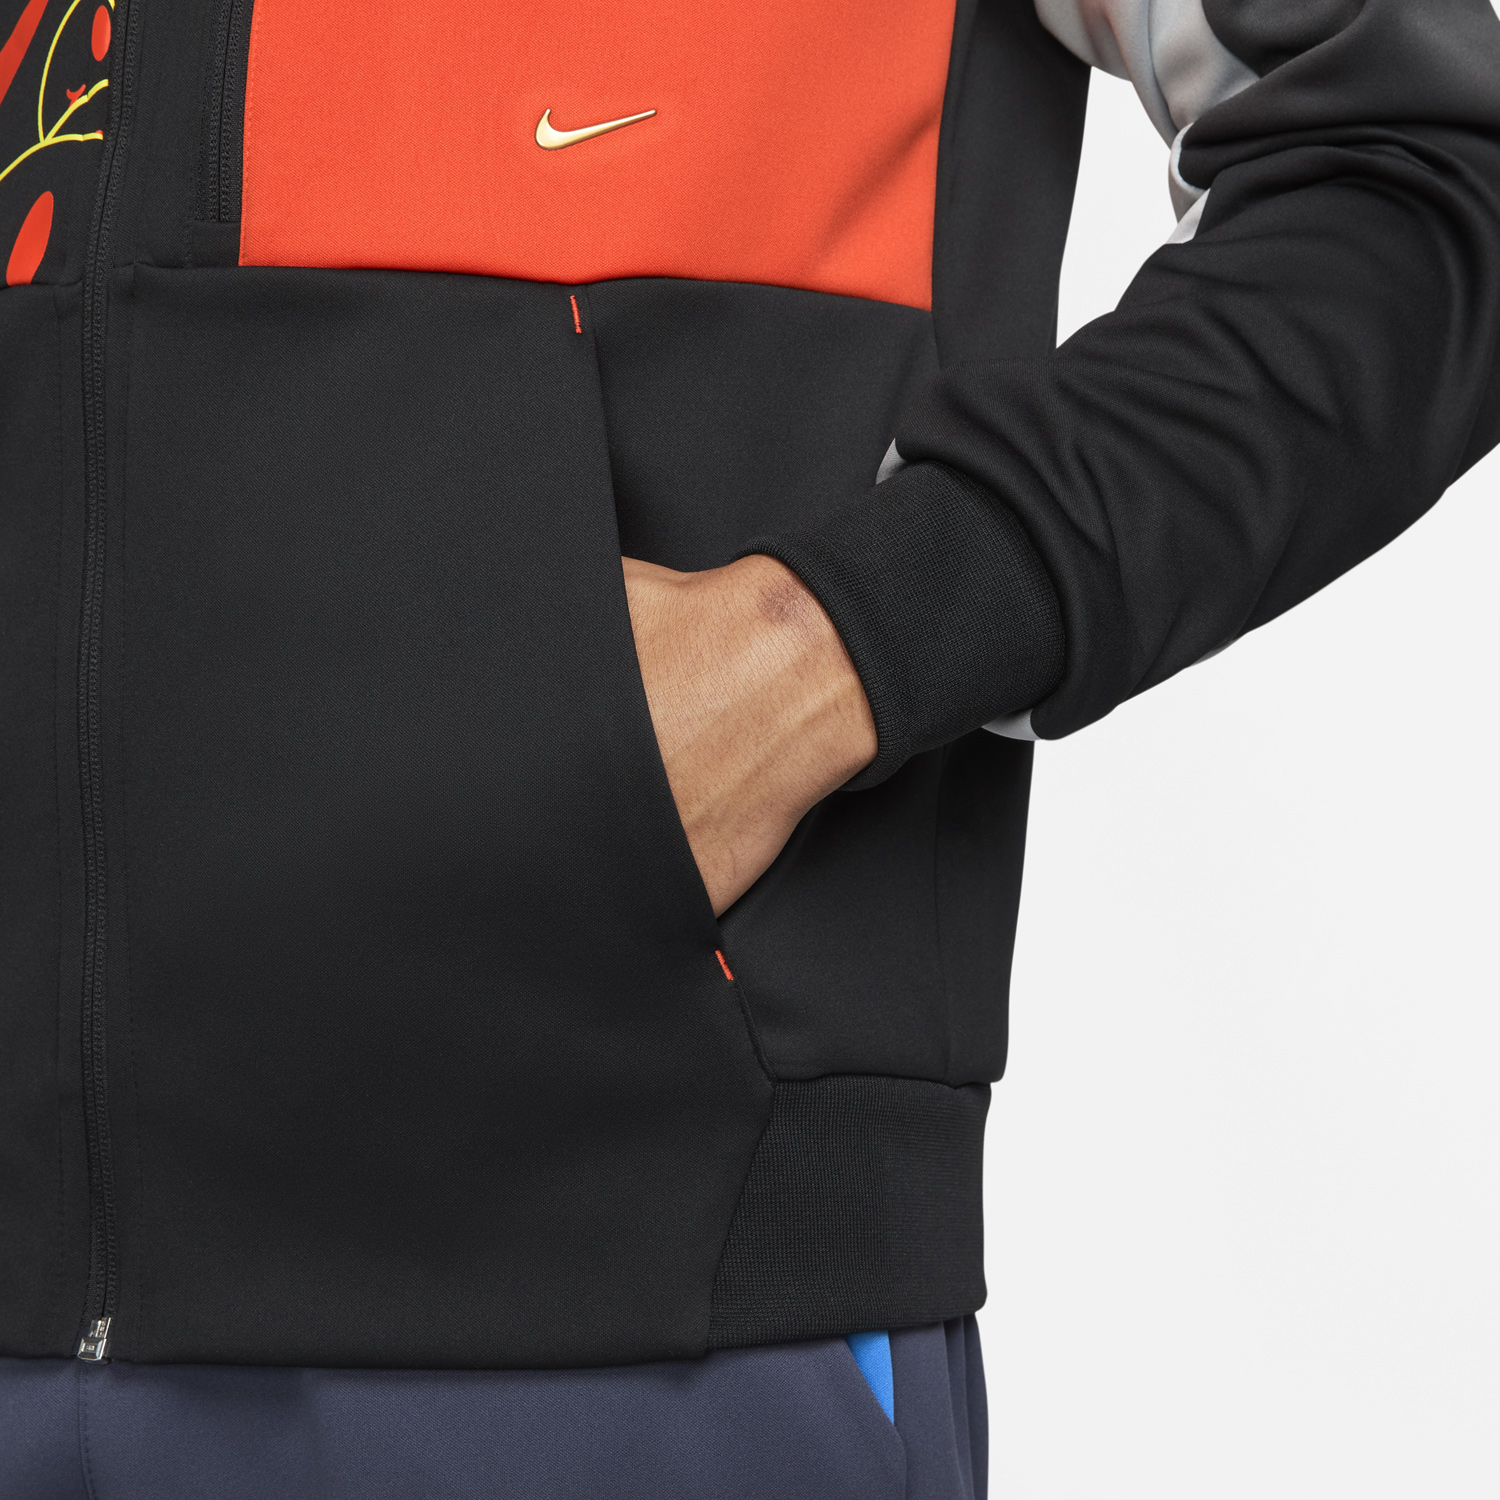 nike-go-the-extra-smile-tribute-track-jacket-black-red-yellow-4